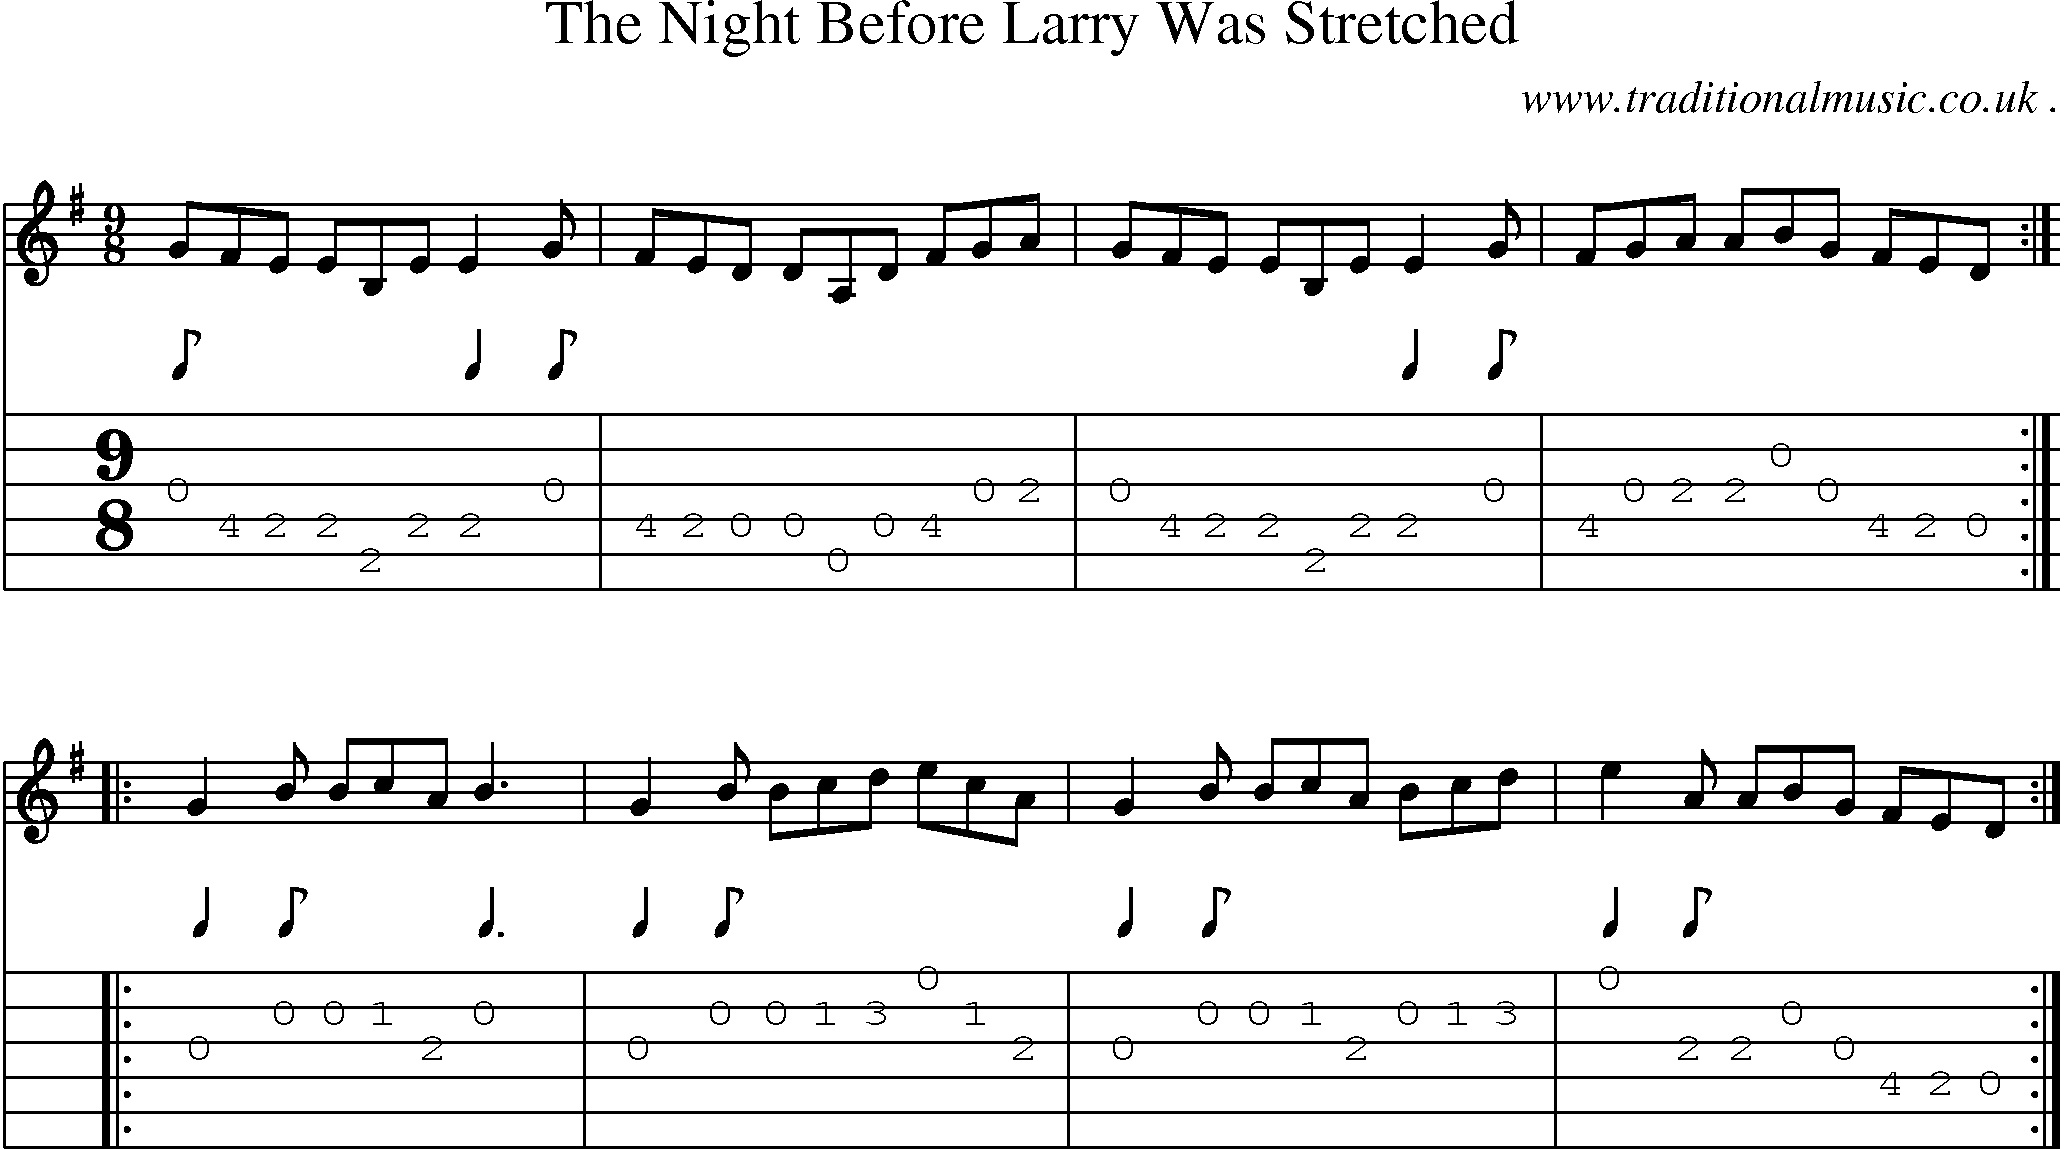 Sheet-Music and Guitar Tabs for The Night Before Larry Was Stretched